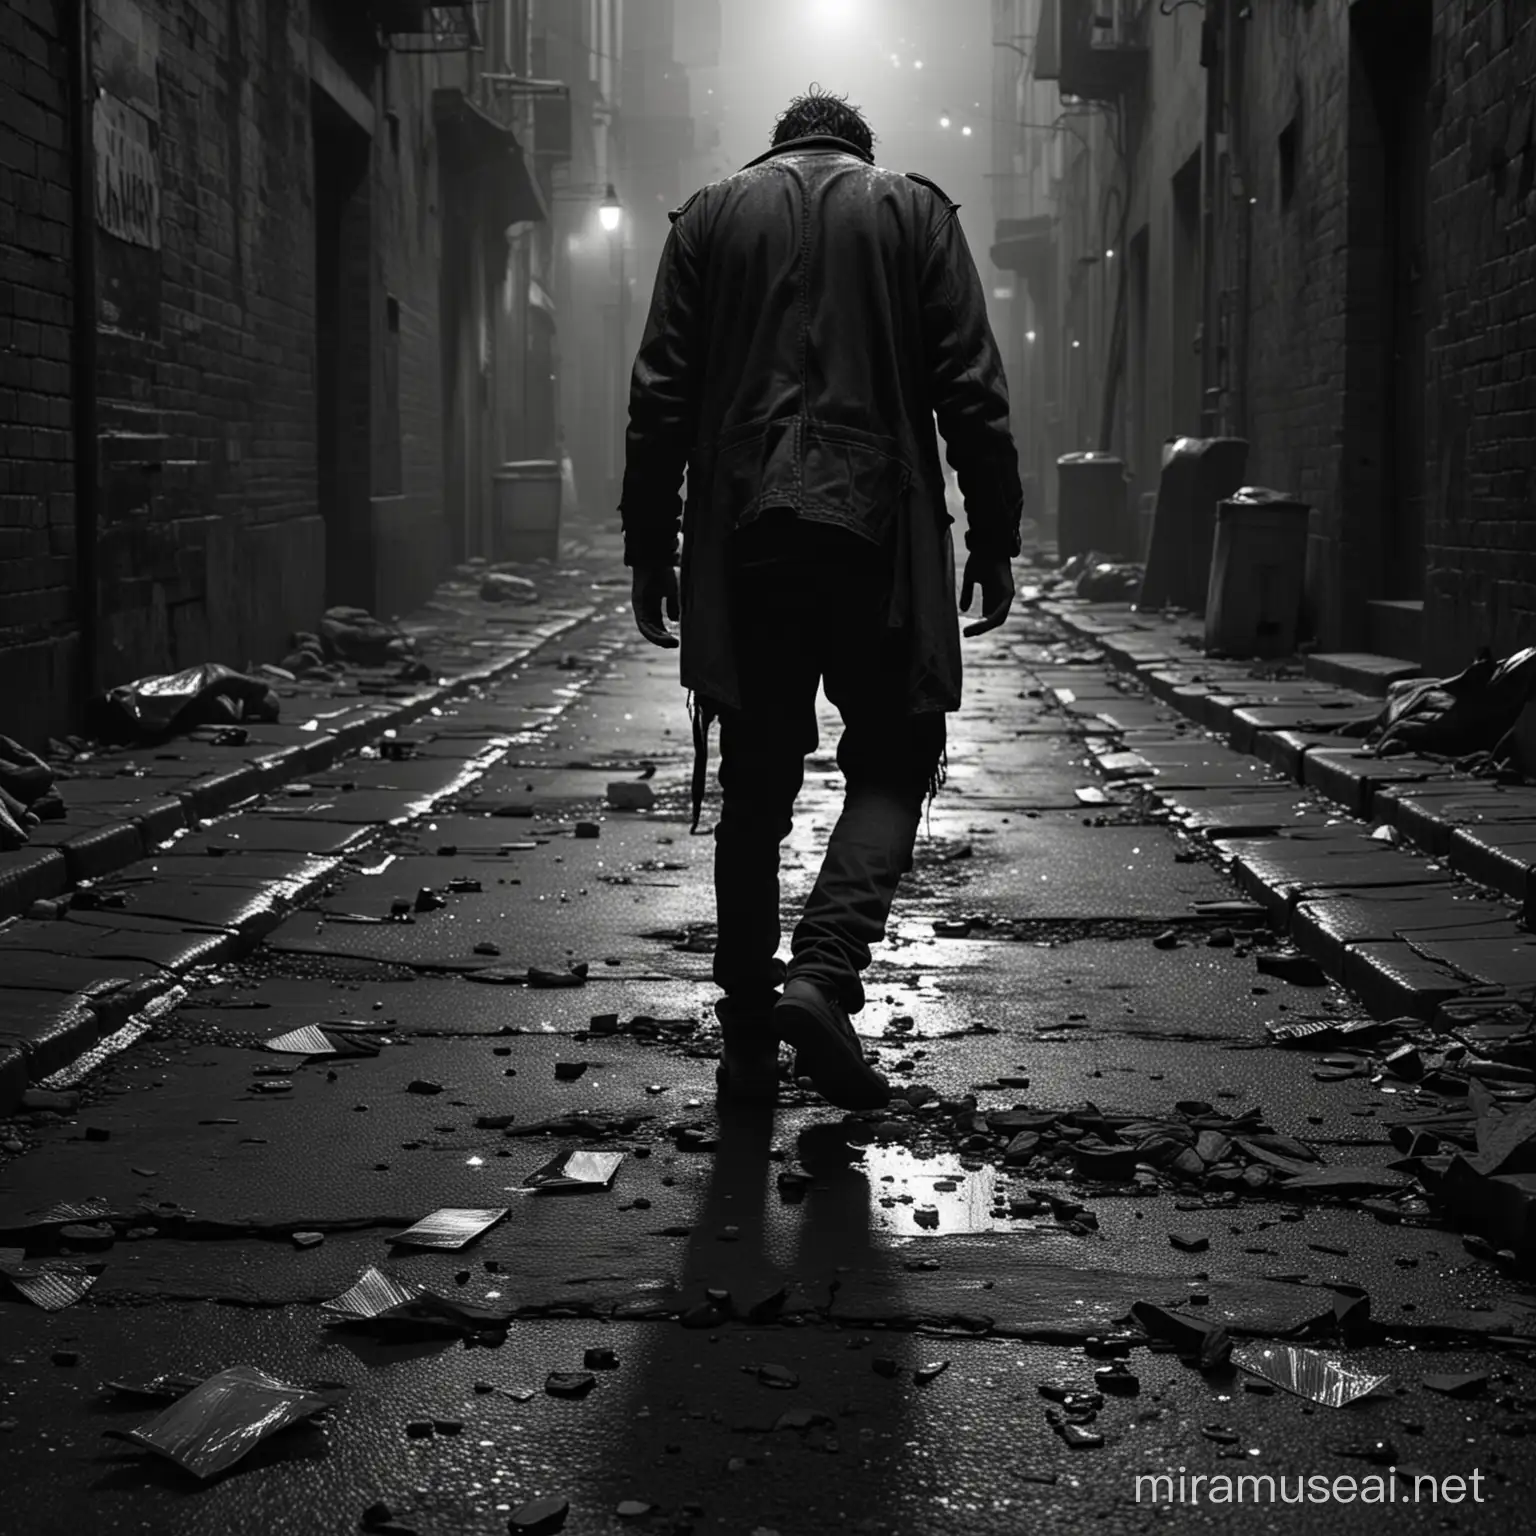 a haggard man with tattered clothes stumbling in dark alley with broken road, nails and broken glass on the road, no light, dark, cinematic, 4K, hyperrealistic, photo from the back, extremely dark, red and sephia ambiance